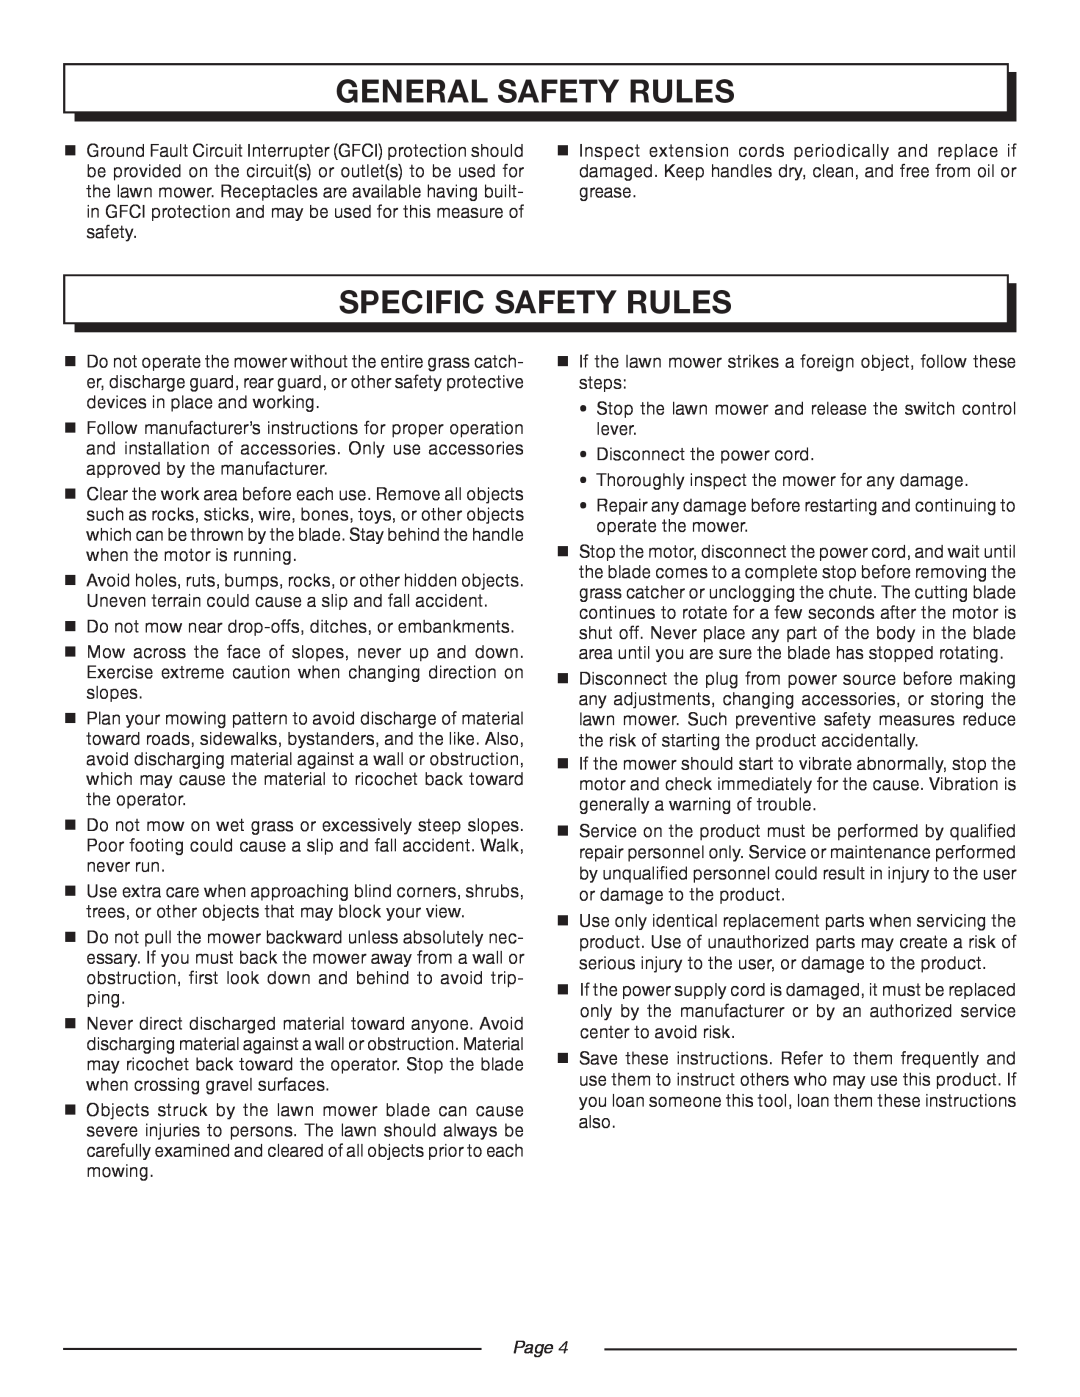 Homelite UT13118 Specific Safety Rules, General Safety Rules,  Do not mow near drop-offs, ditches, or embankments, Page 